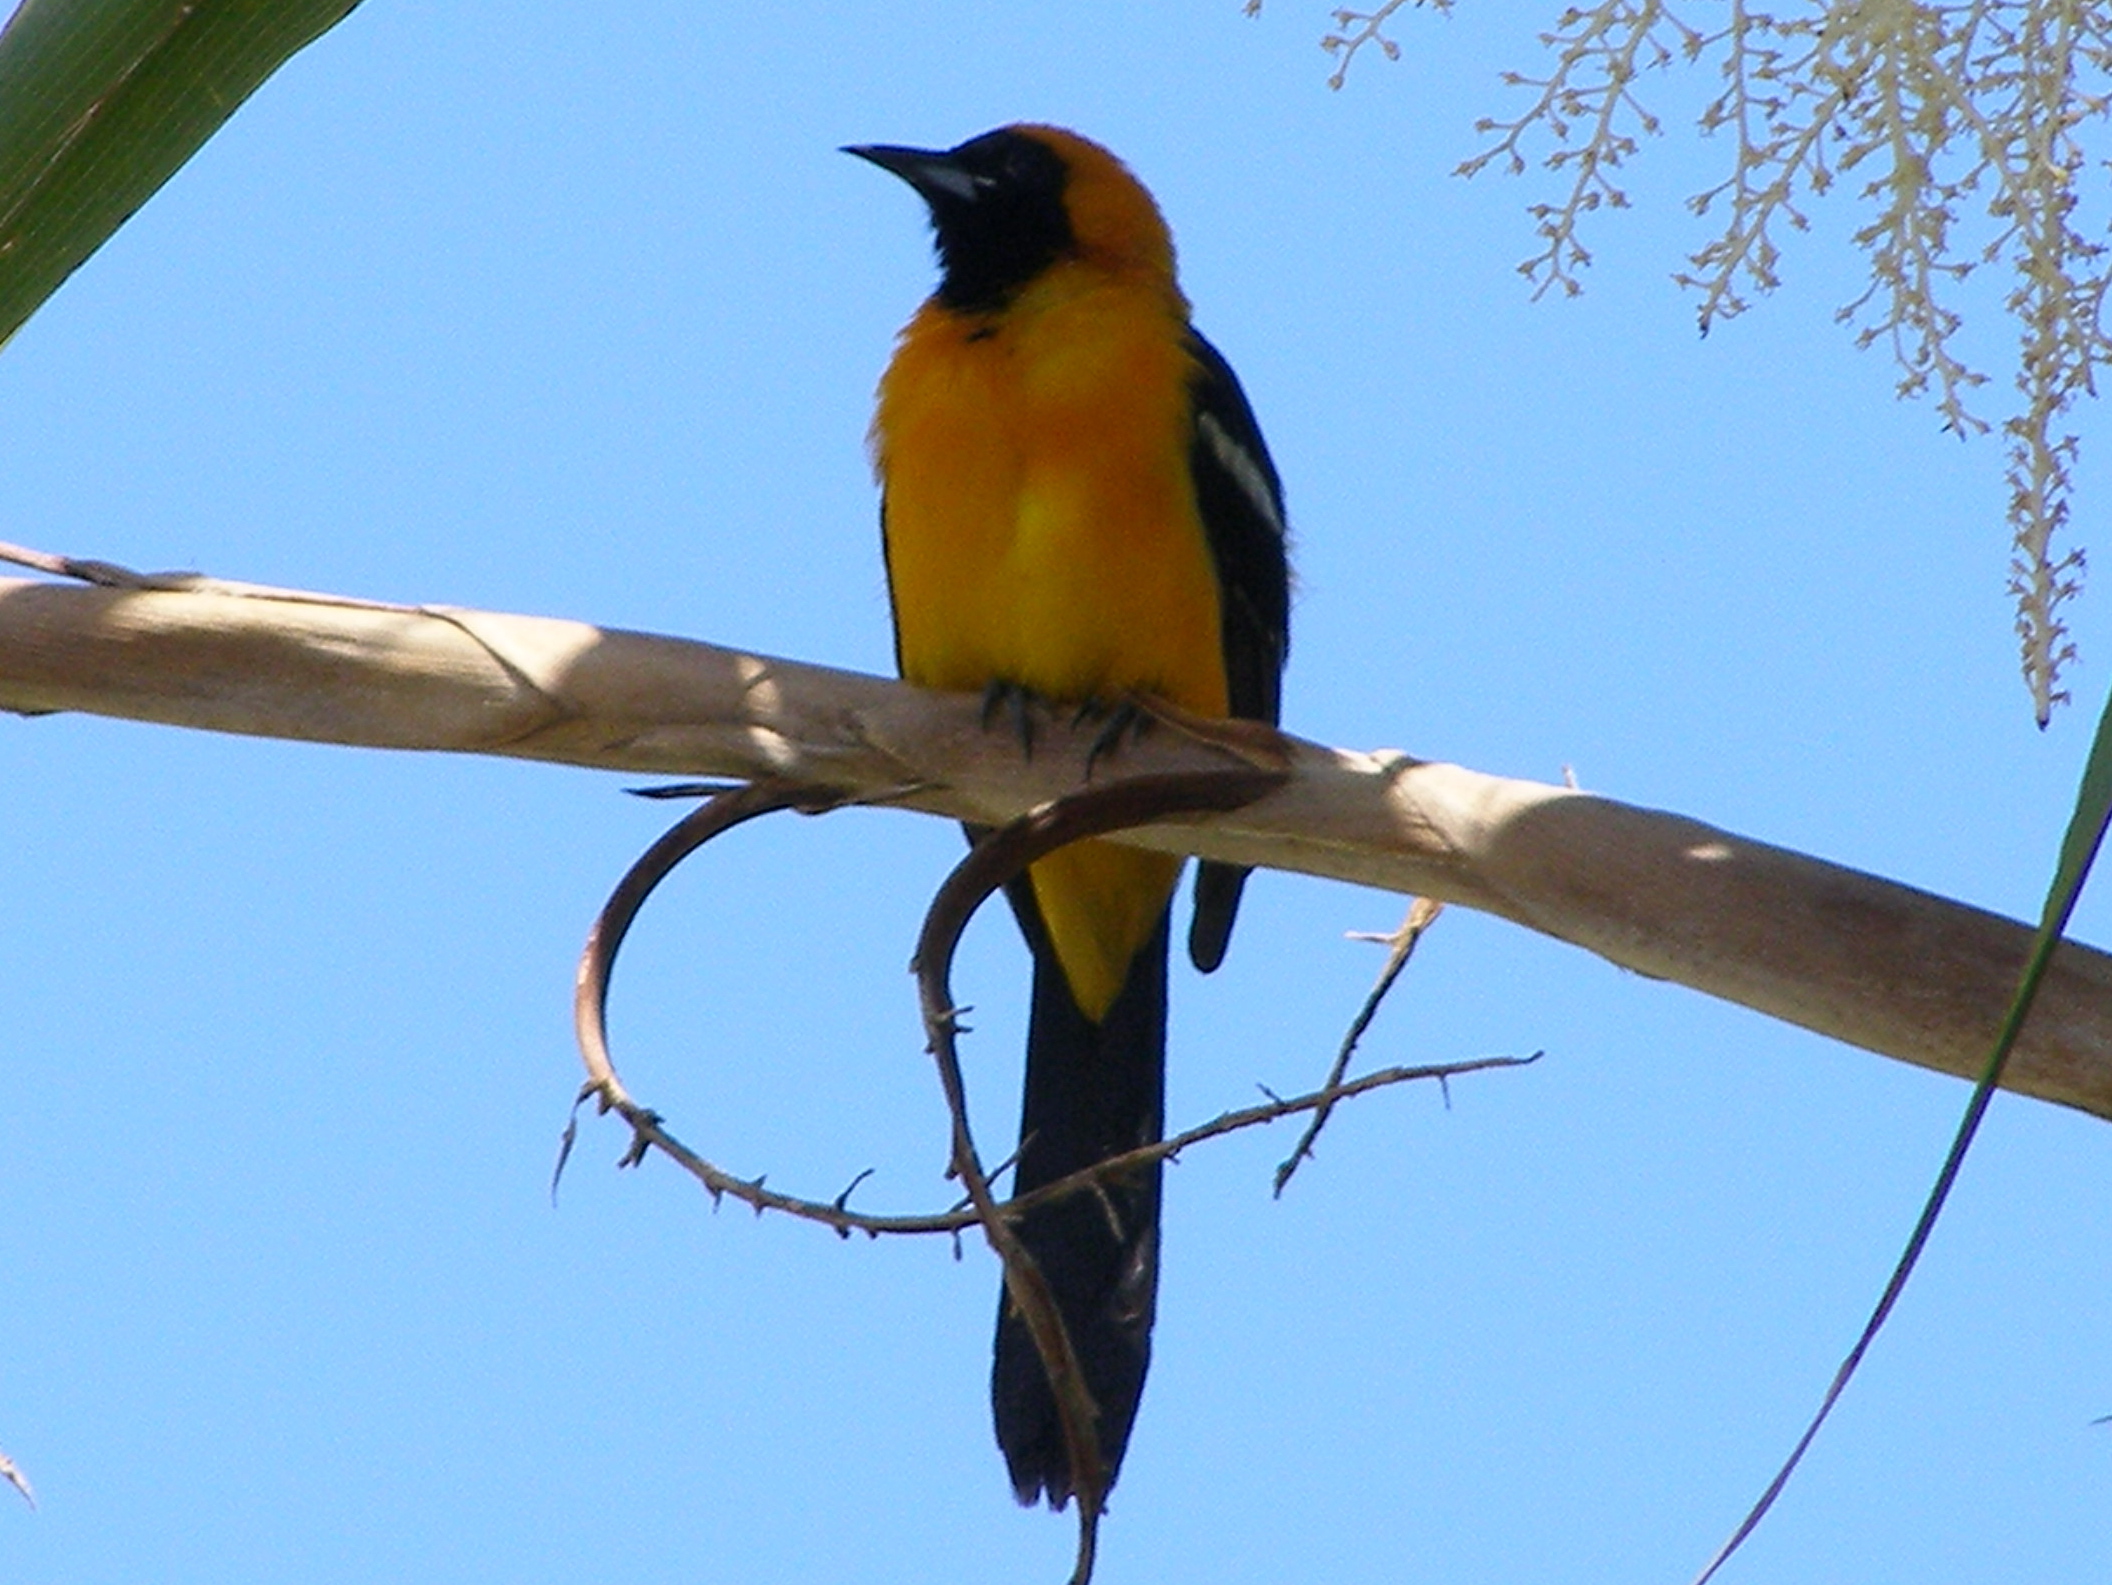 Click picture to see more Orange Orioles.